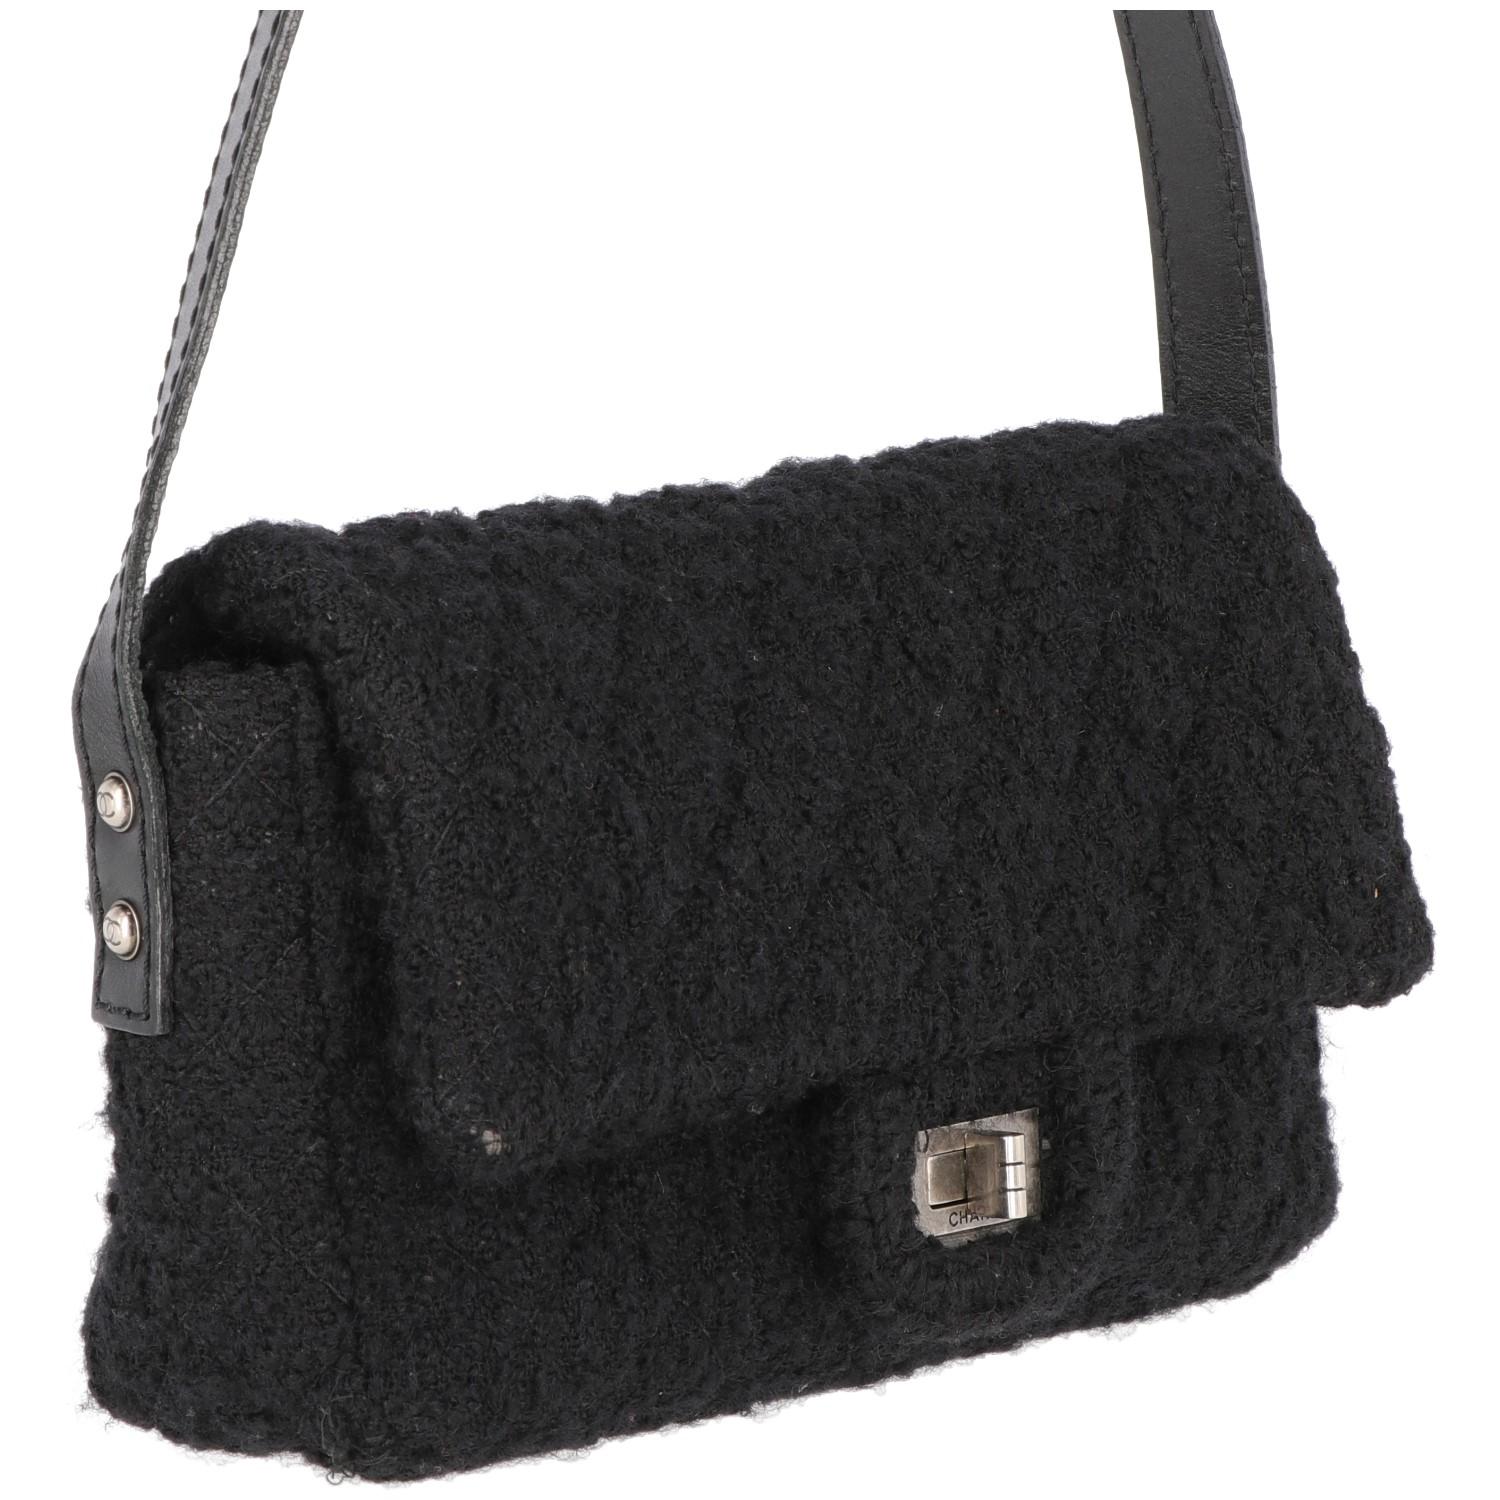 Lively Chanel black wool blend and leather tweed shoulder bag. It features a metal silver-tone branded turn-lock closure, one outer pocket and the inner with zip.  The item is vintage, according to the data code n. 13105626, it was produced between